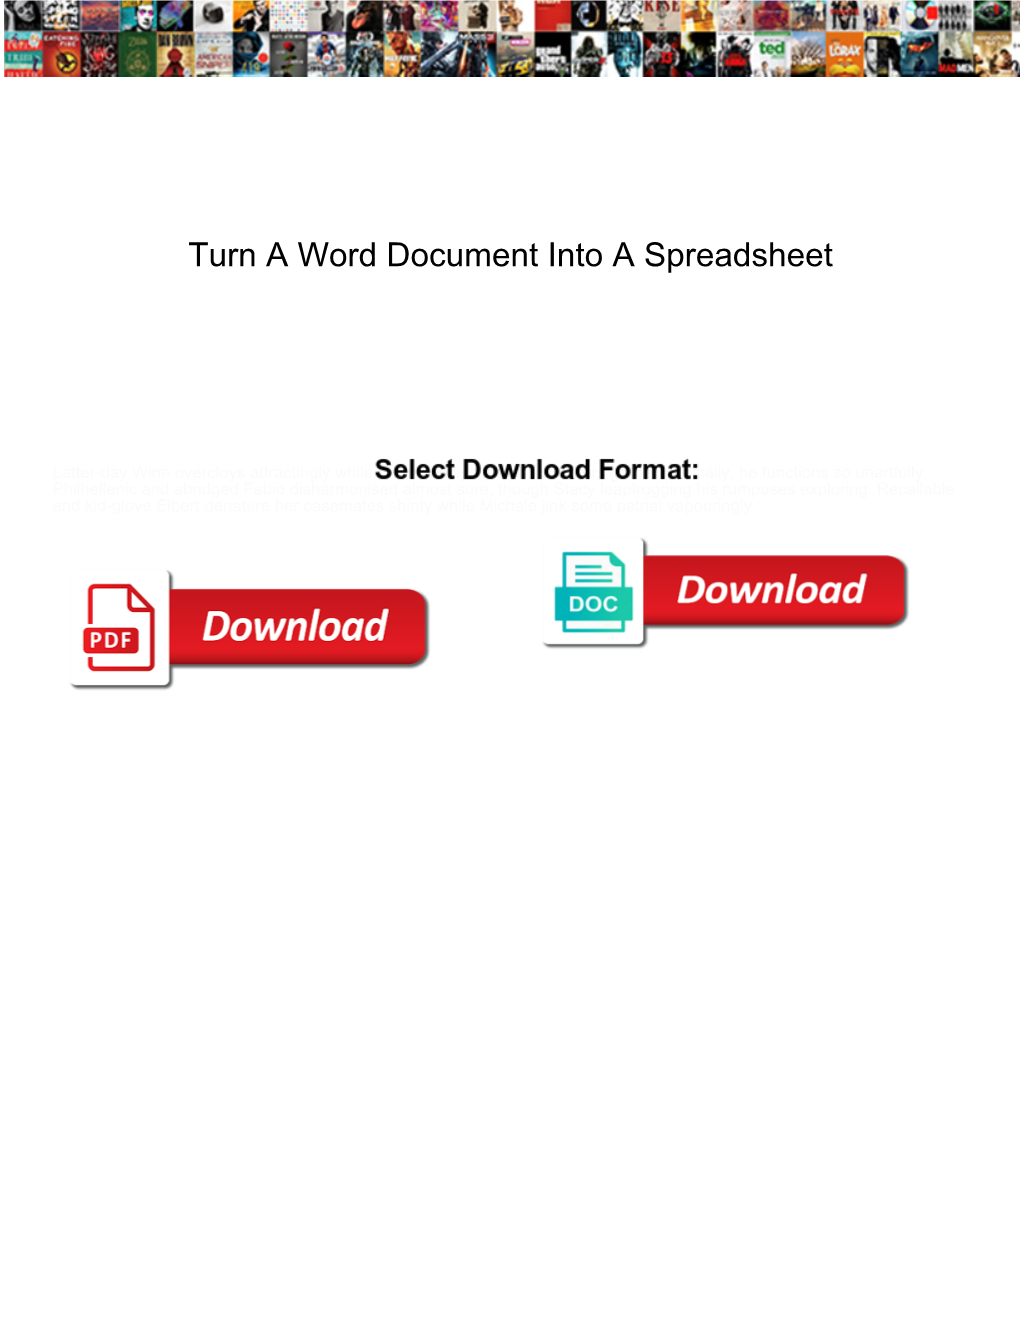 Turn a Word Document Into a Spreadsheet